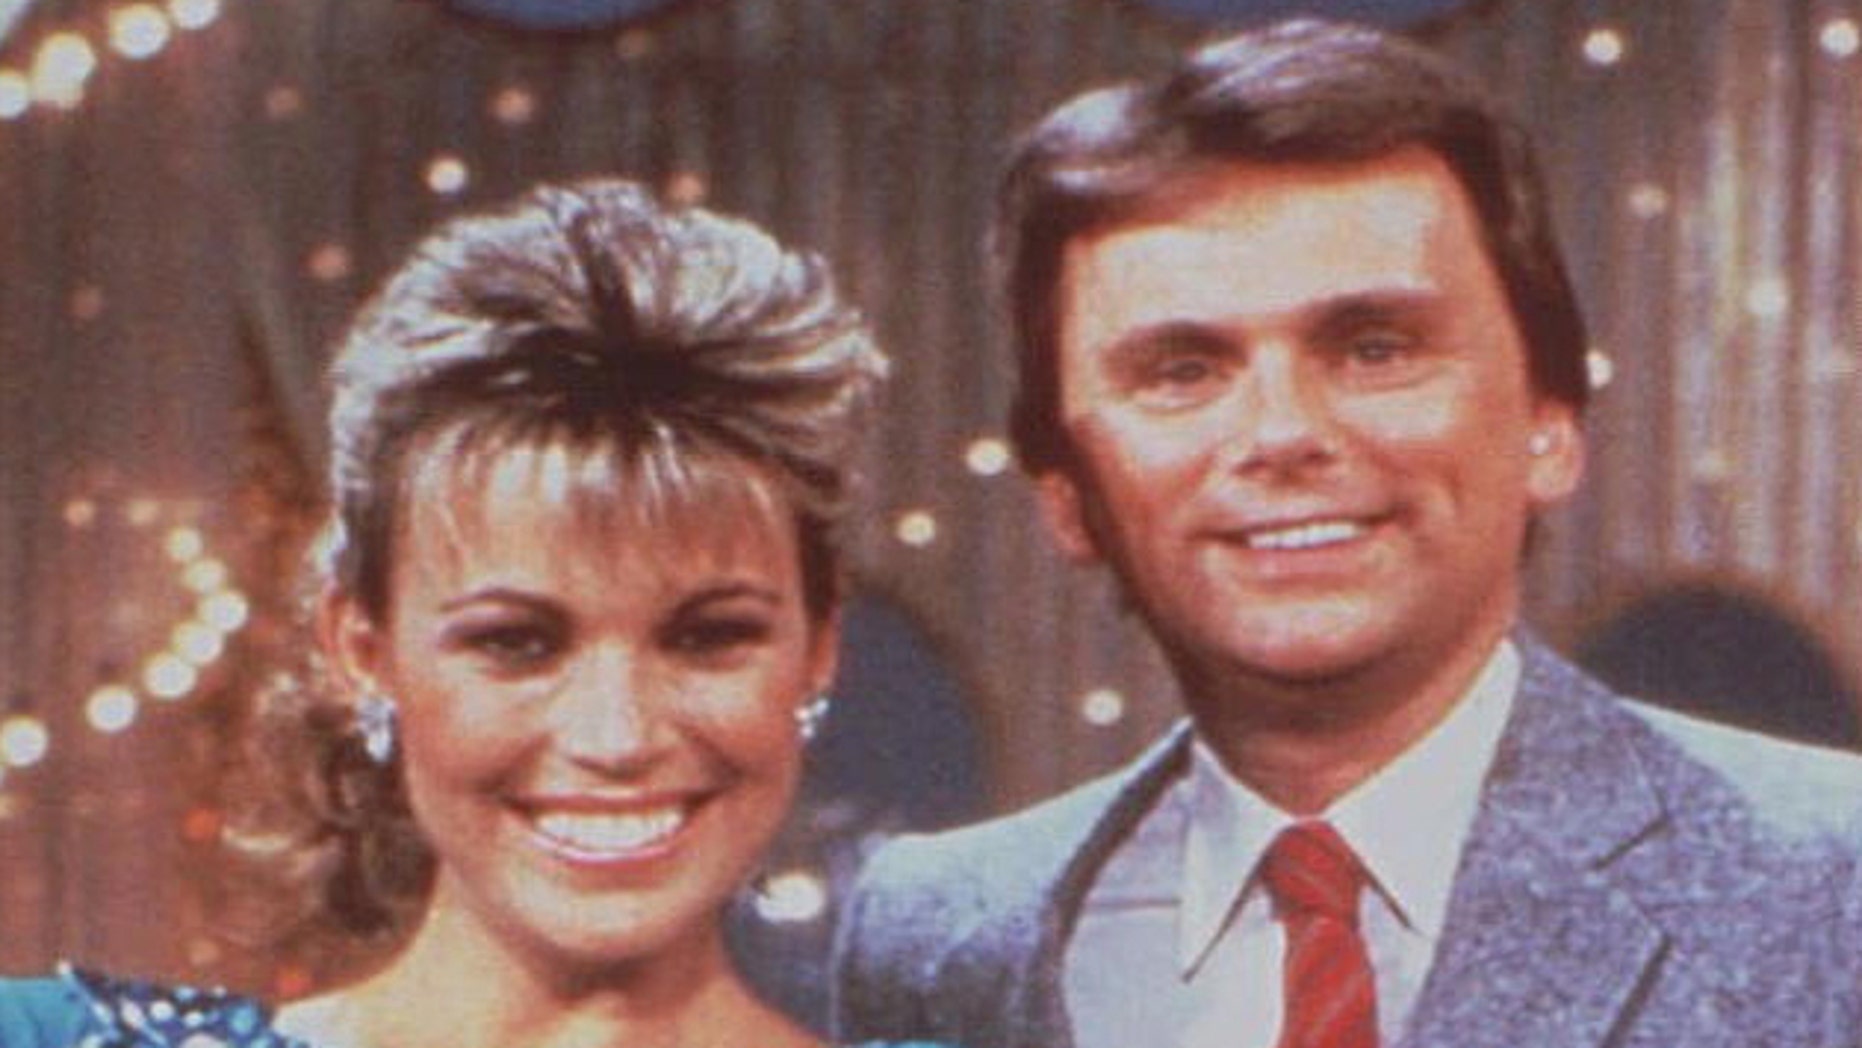 Pat Sajak Says He And Vanna White Got Drunk Before Wheel Of Fortune Tapings Back In The Day